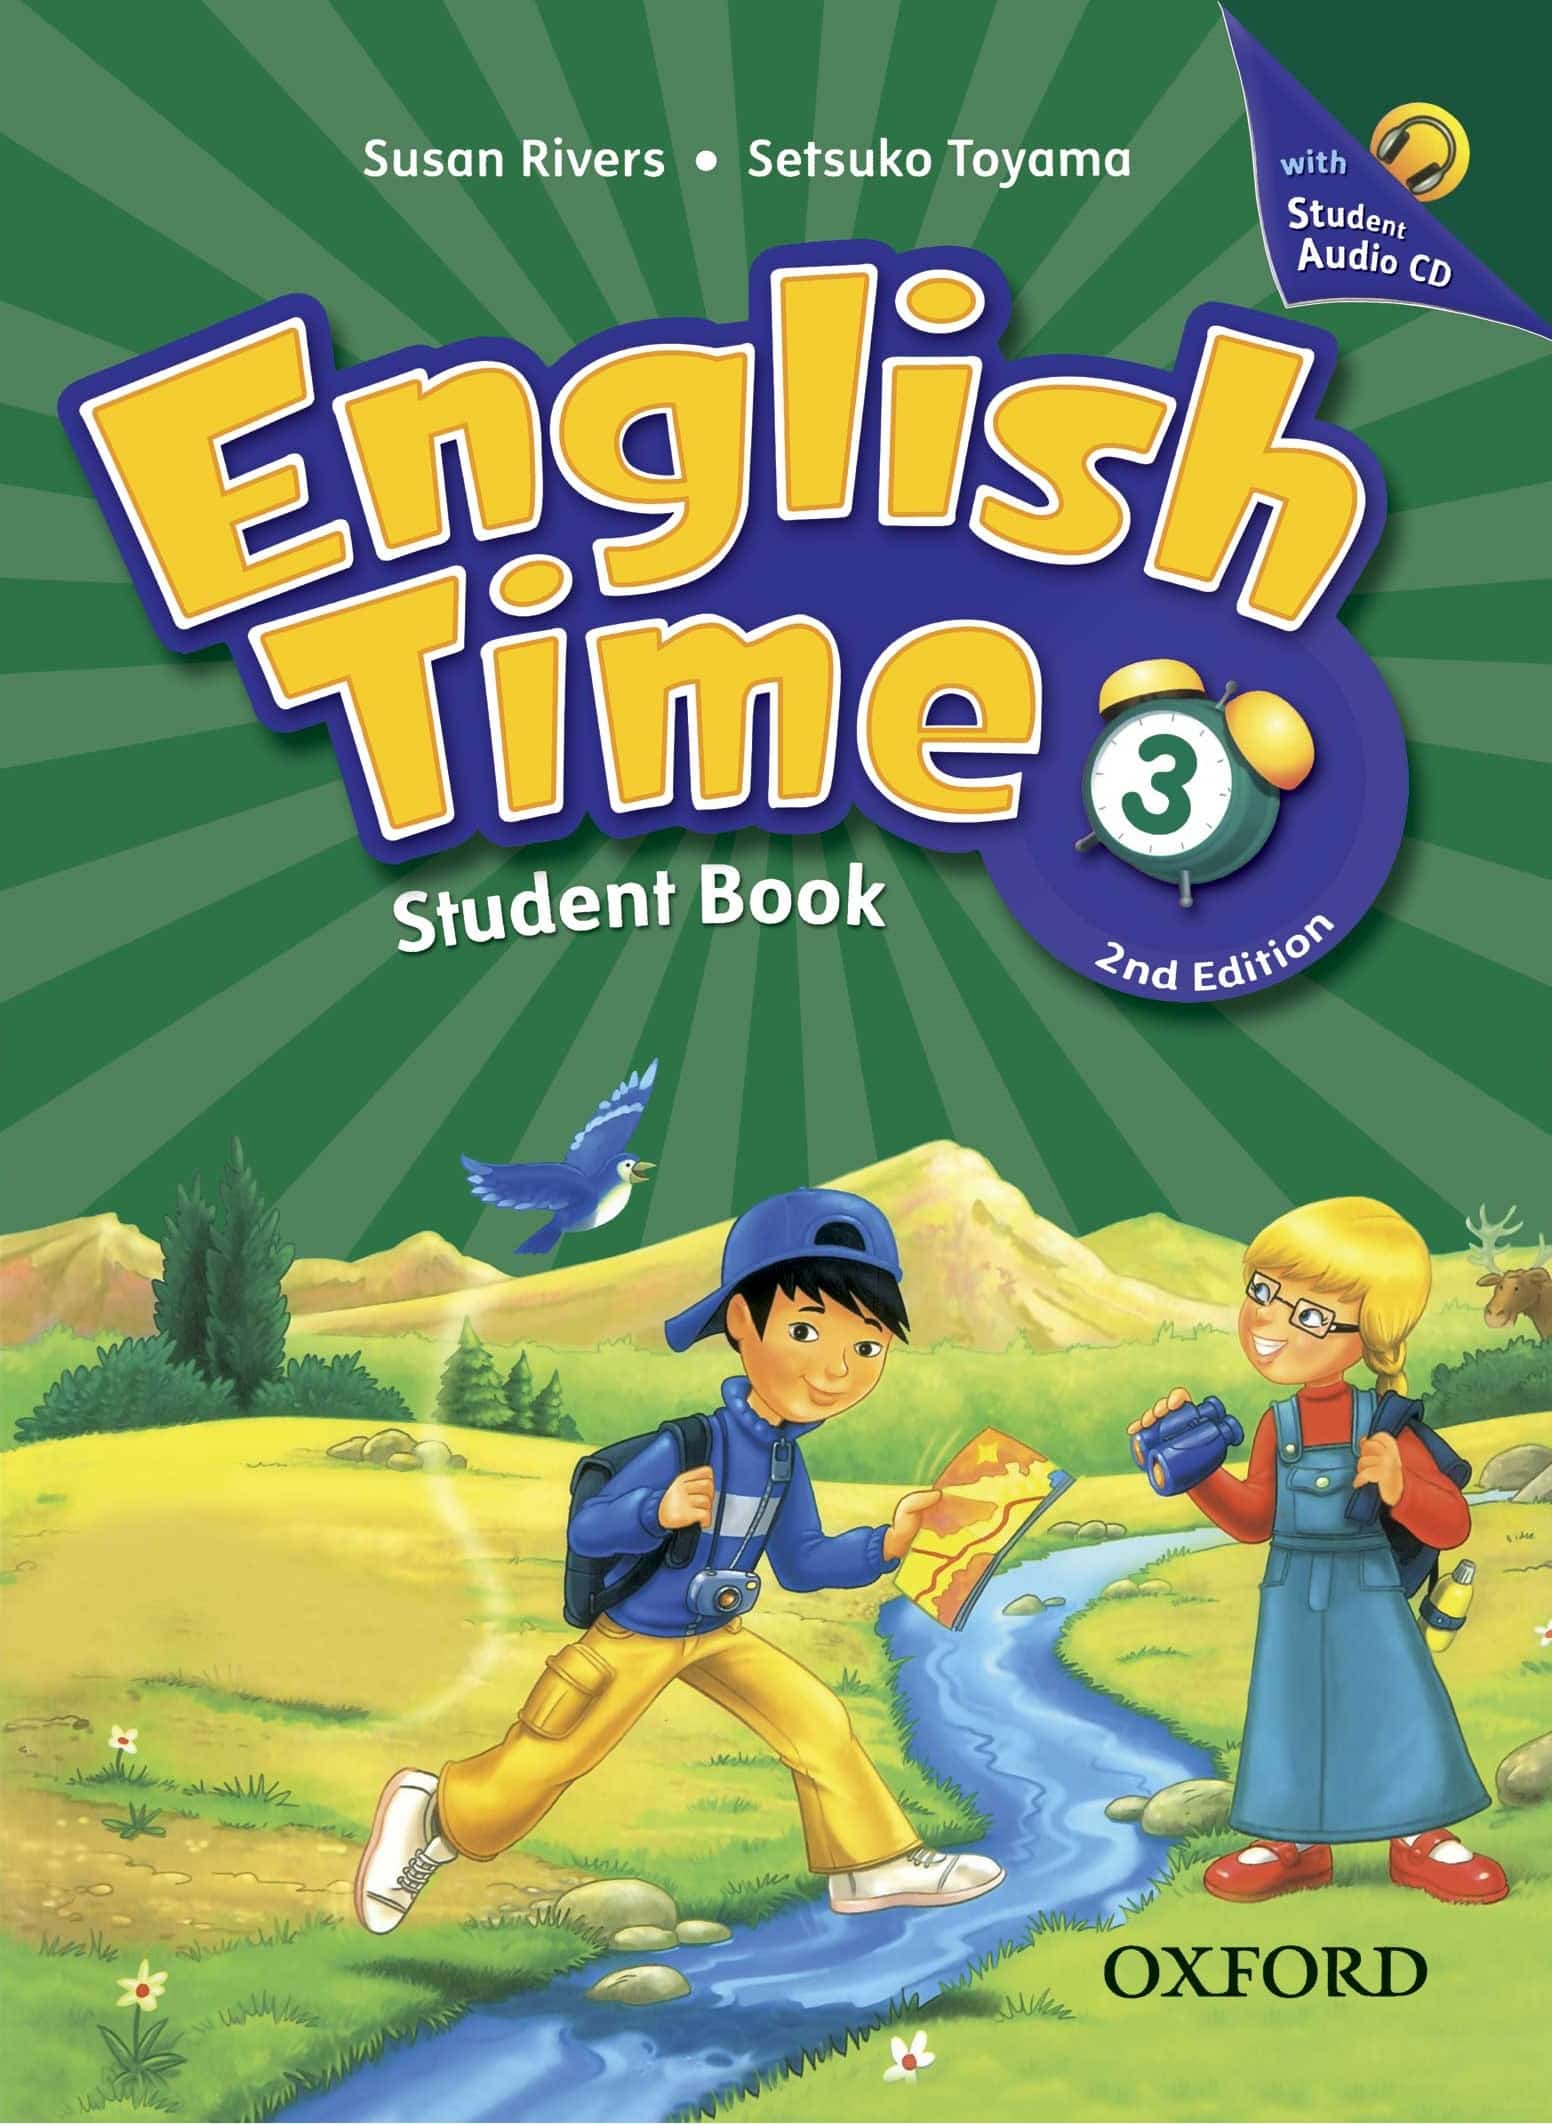 Download Prime Time 3 Student Book Pdf free